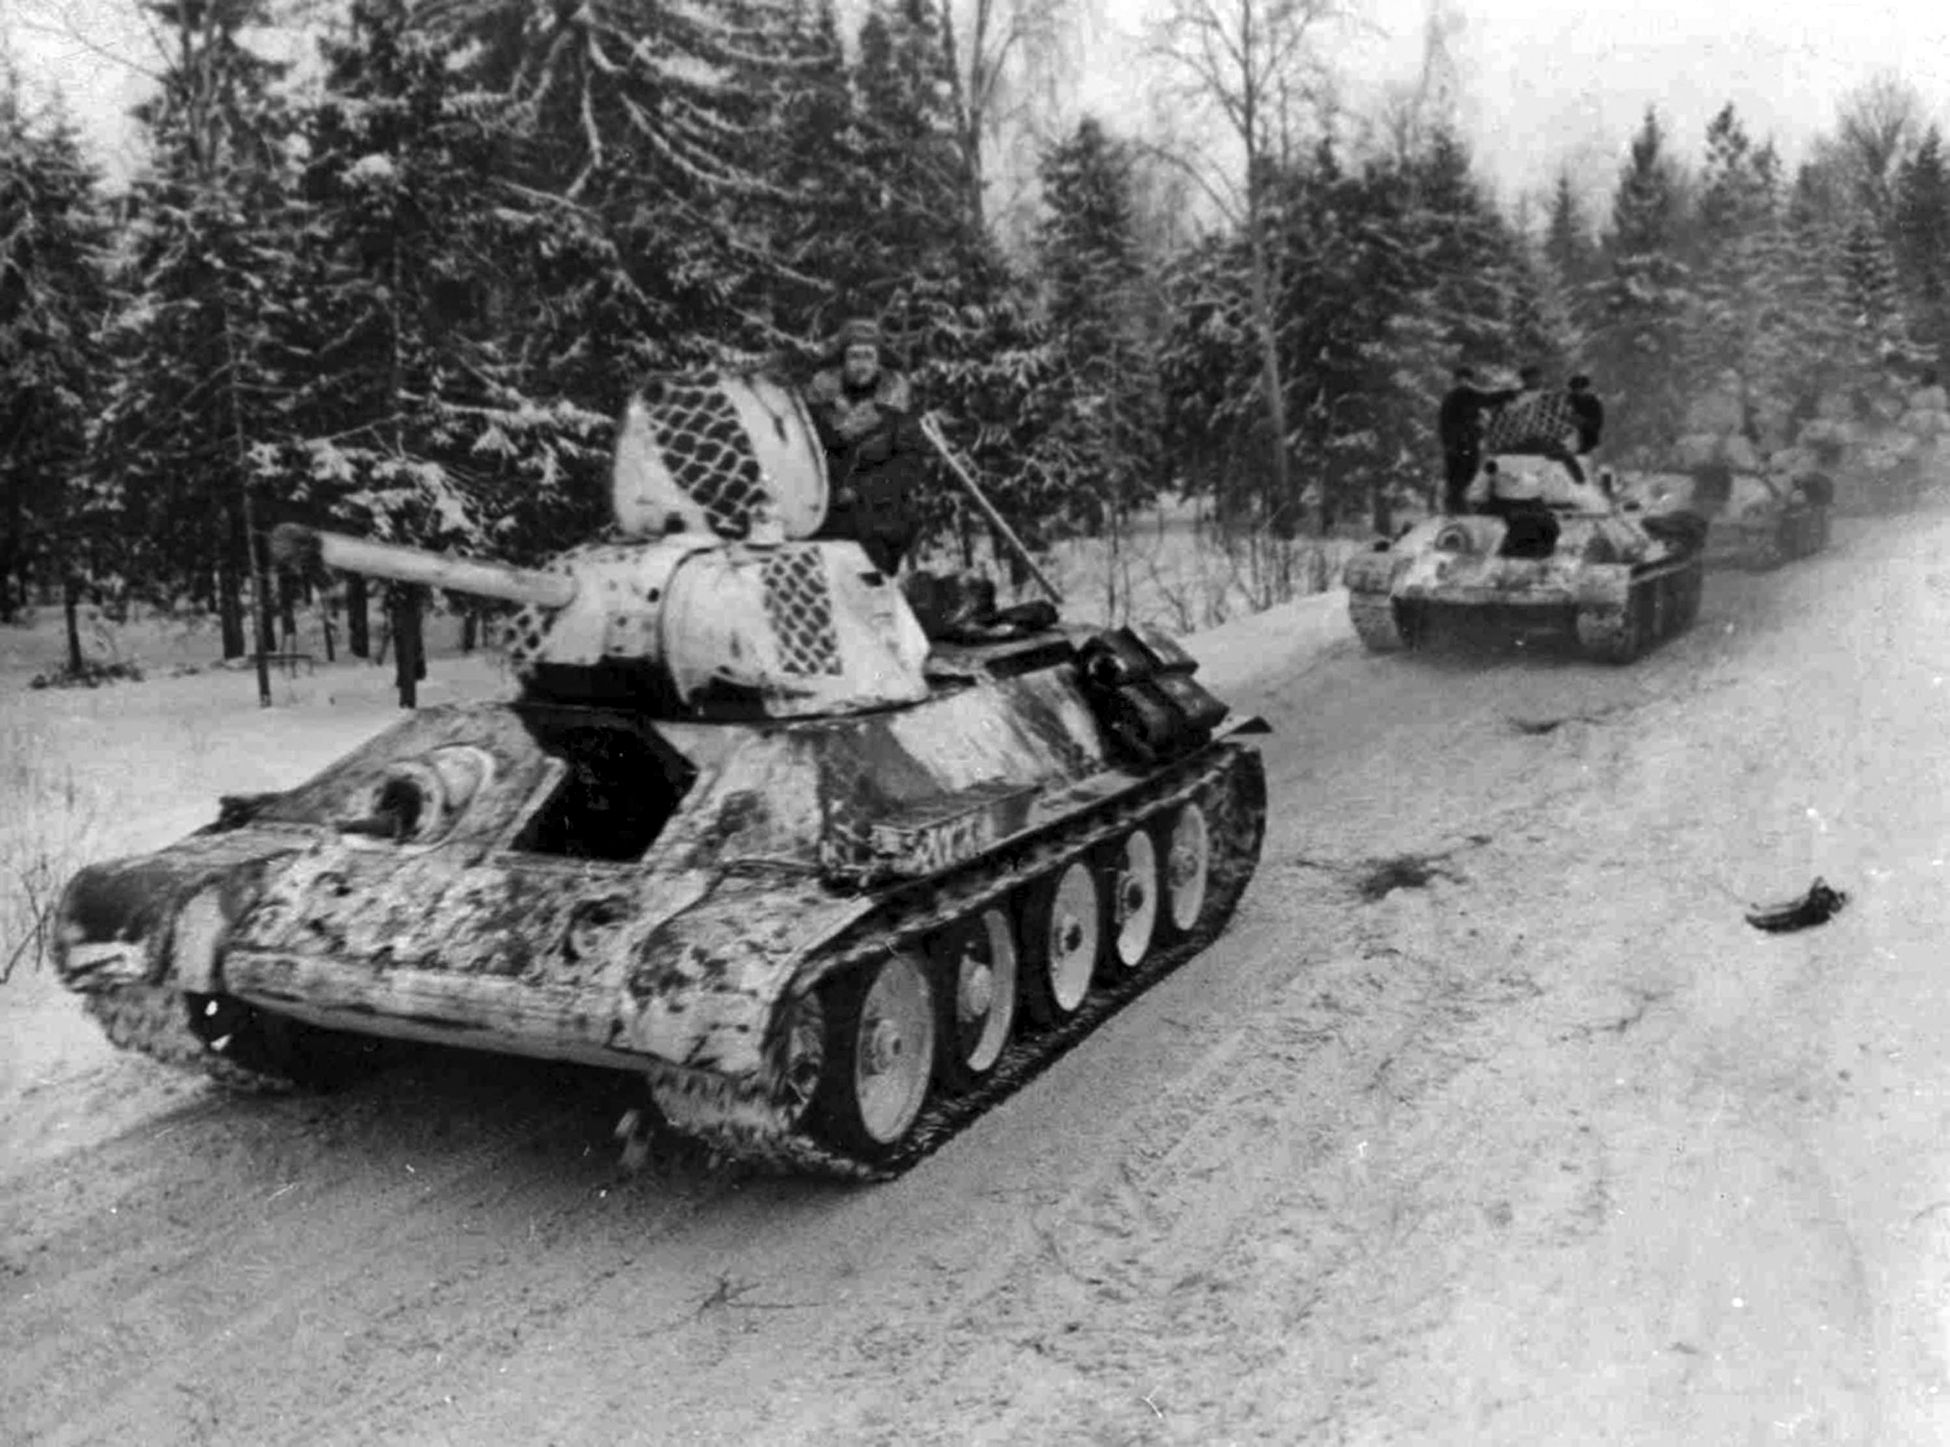 A column of Soviet T-34 tanks with winter “tire track” camouflage. The Russian forces held a numerical advantage of nearly five tanks to one over the Germans at the Battle of the Korsun-Cherkassy Pocket. In artillery, the ratio was estimated to be about 10-1 in favor of the Soviets. 